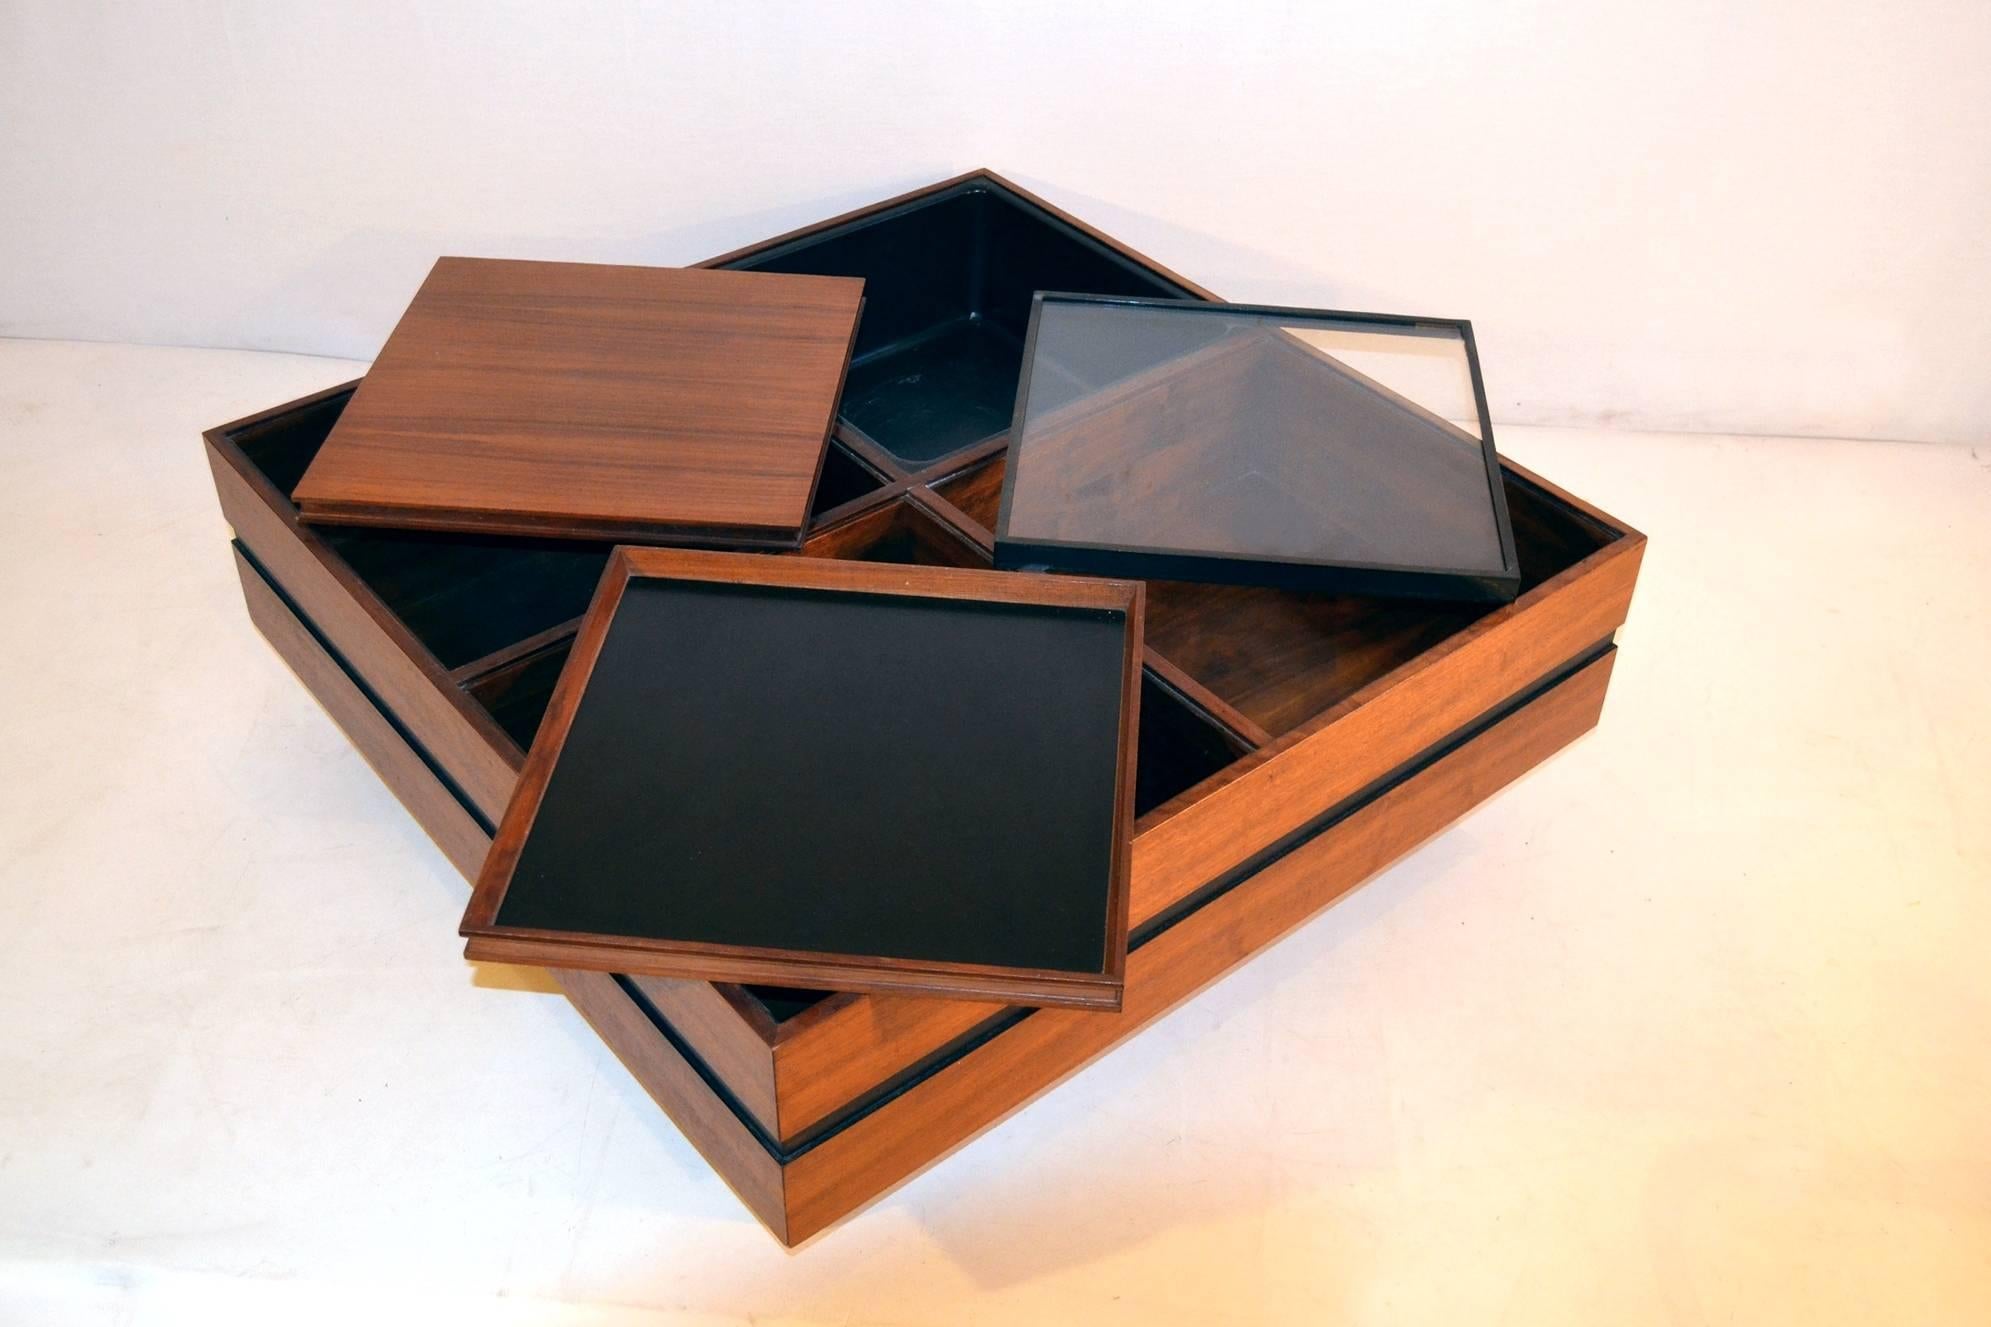 Architectural cocktail tables with four square elements each. The tables consist of a one flower pot, one glass top, one wood top and one tray top. The base of the table has a horizontal line that divides upper and lower half and sits on four square